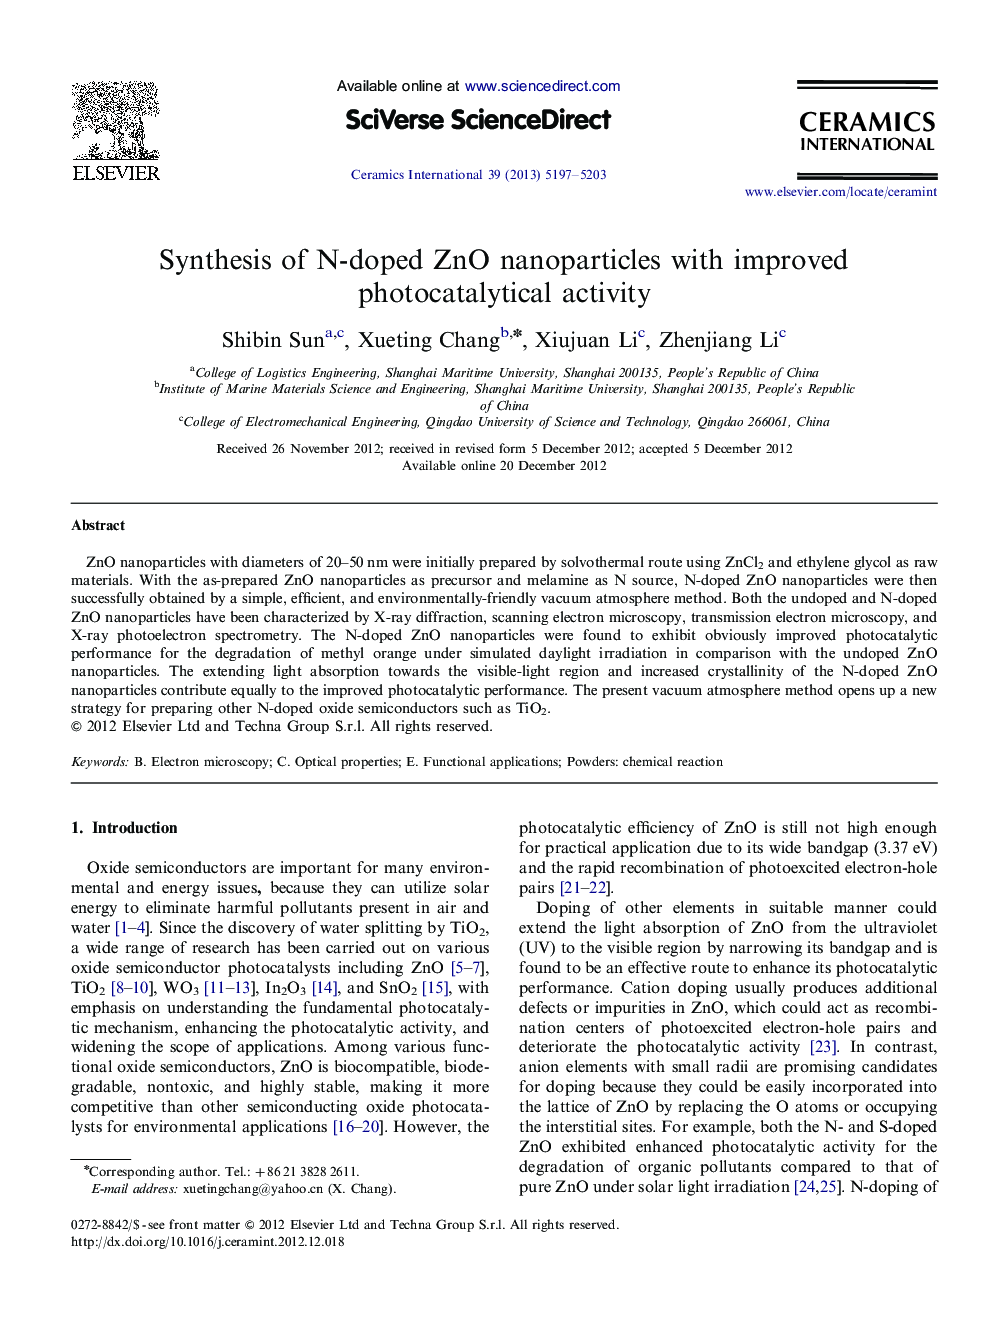 Synthesis of N-doped ZnO nanoparticles with improved photocatalytical activity